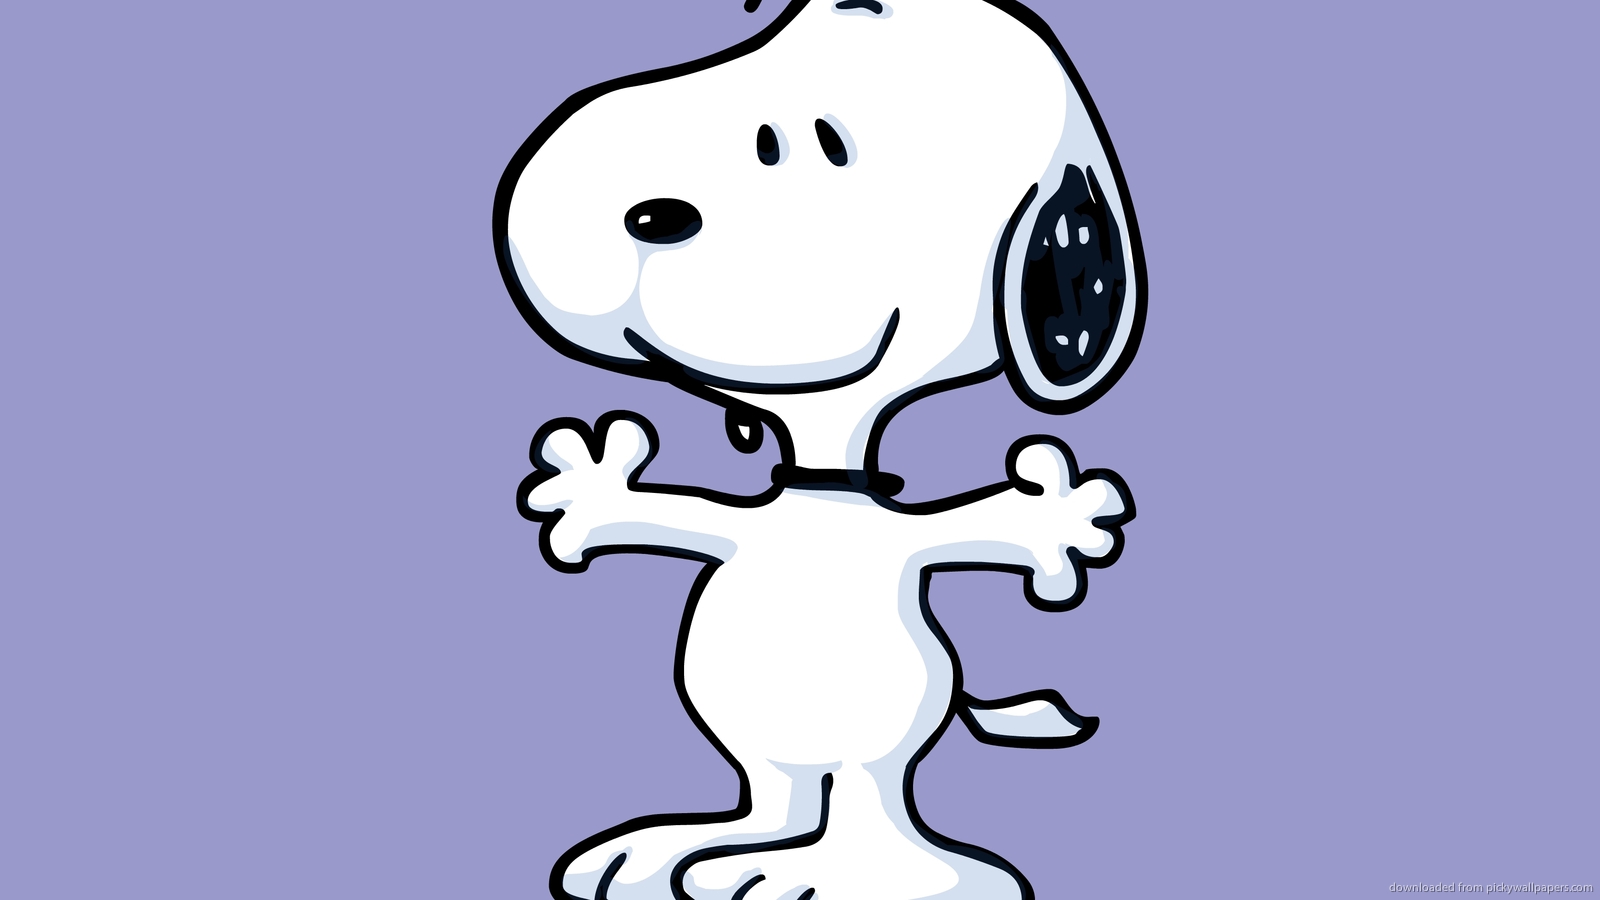 Download 1600x900 Snoopy Purple Background Wallpaper